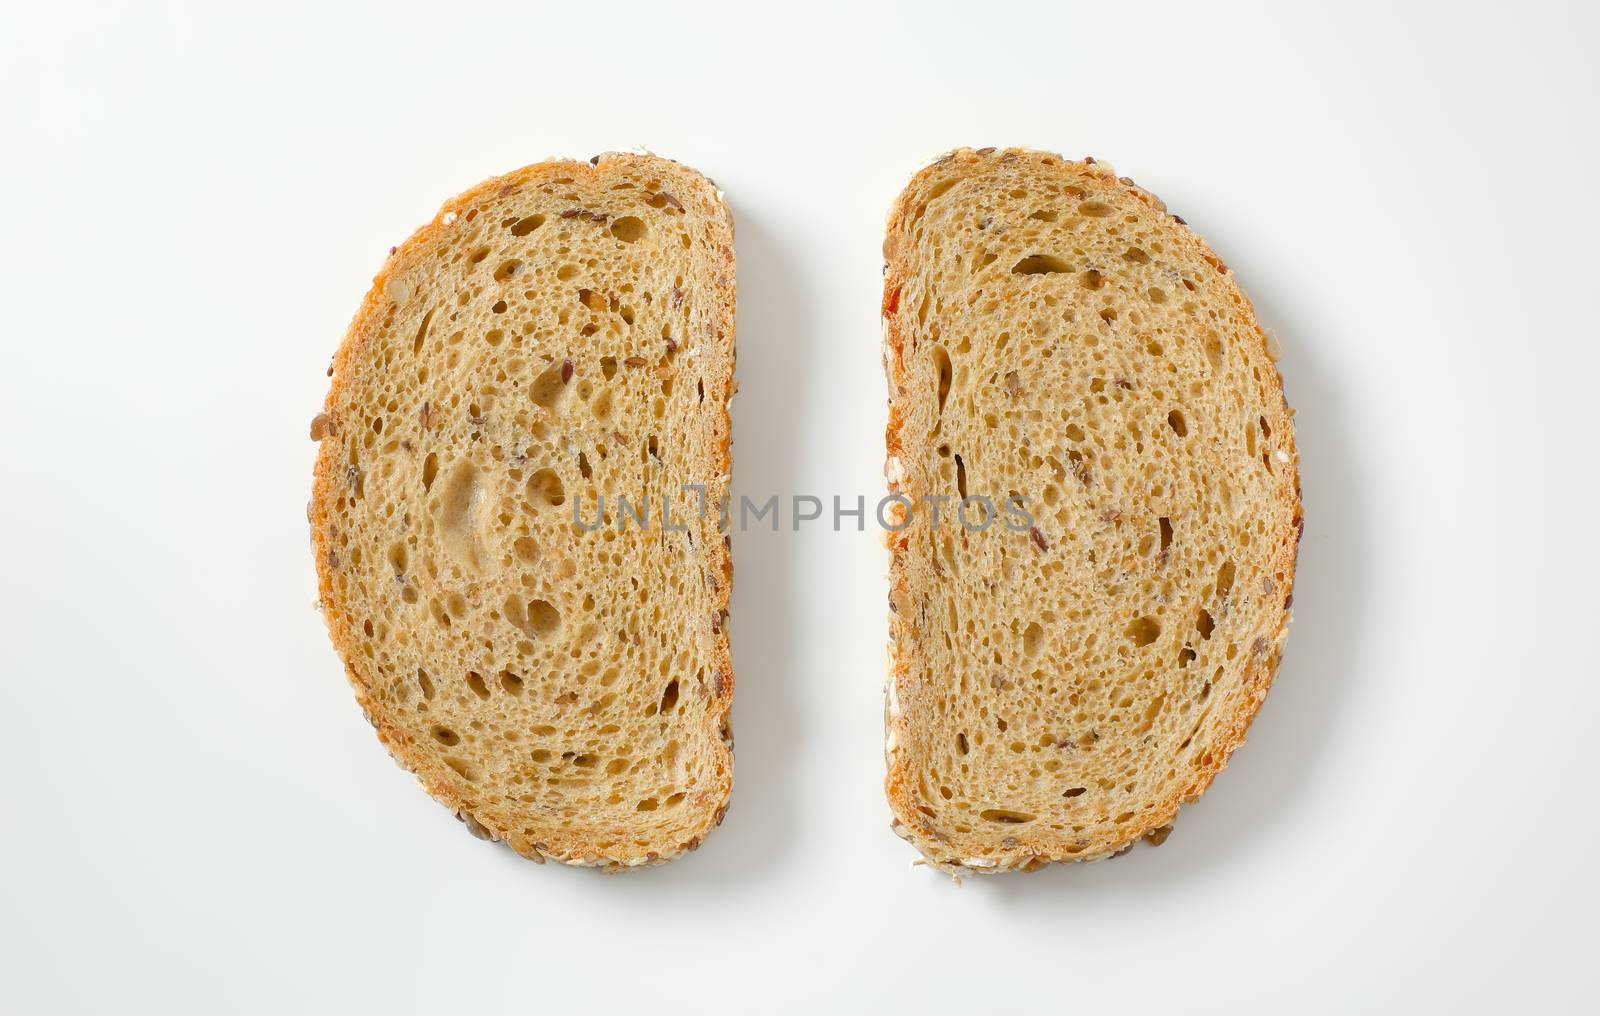 Two slices of whole grain bread by Digifoodstock